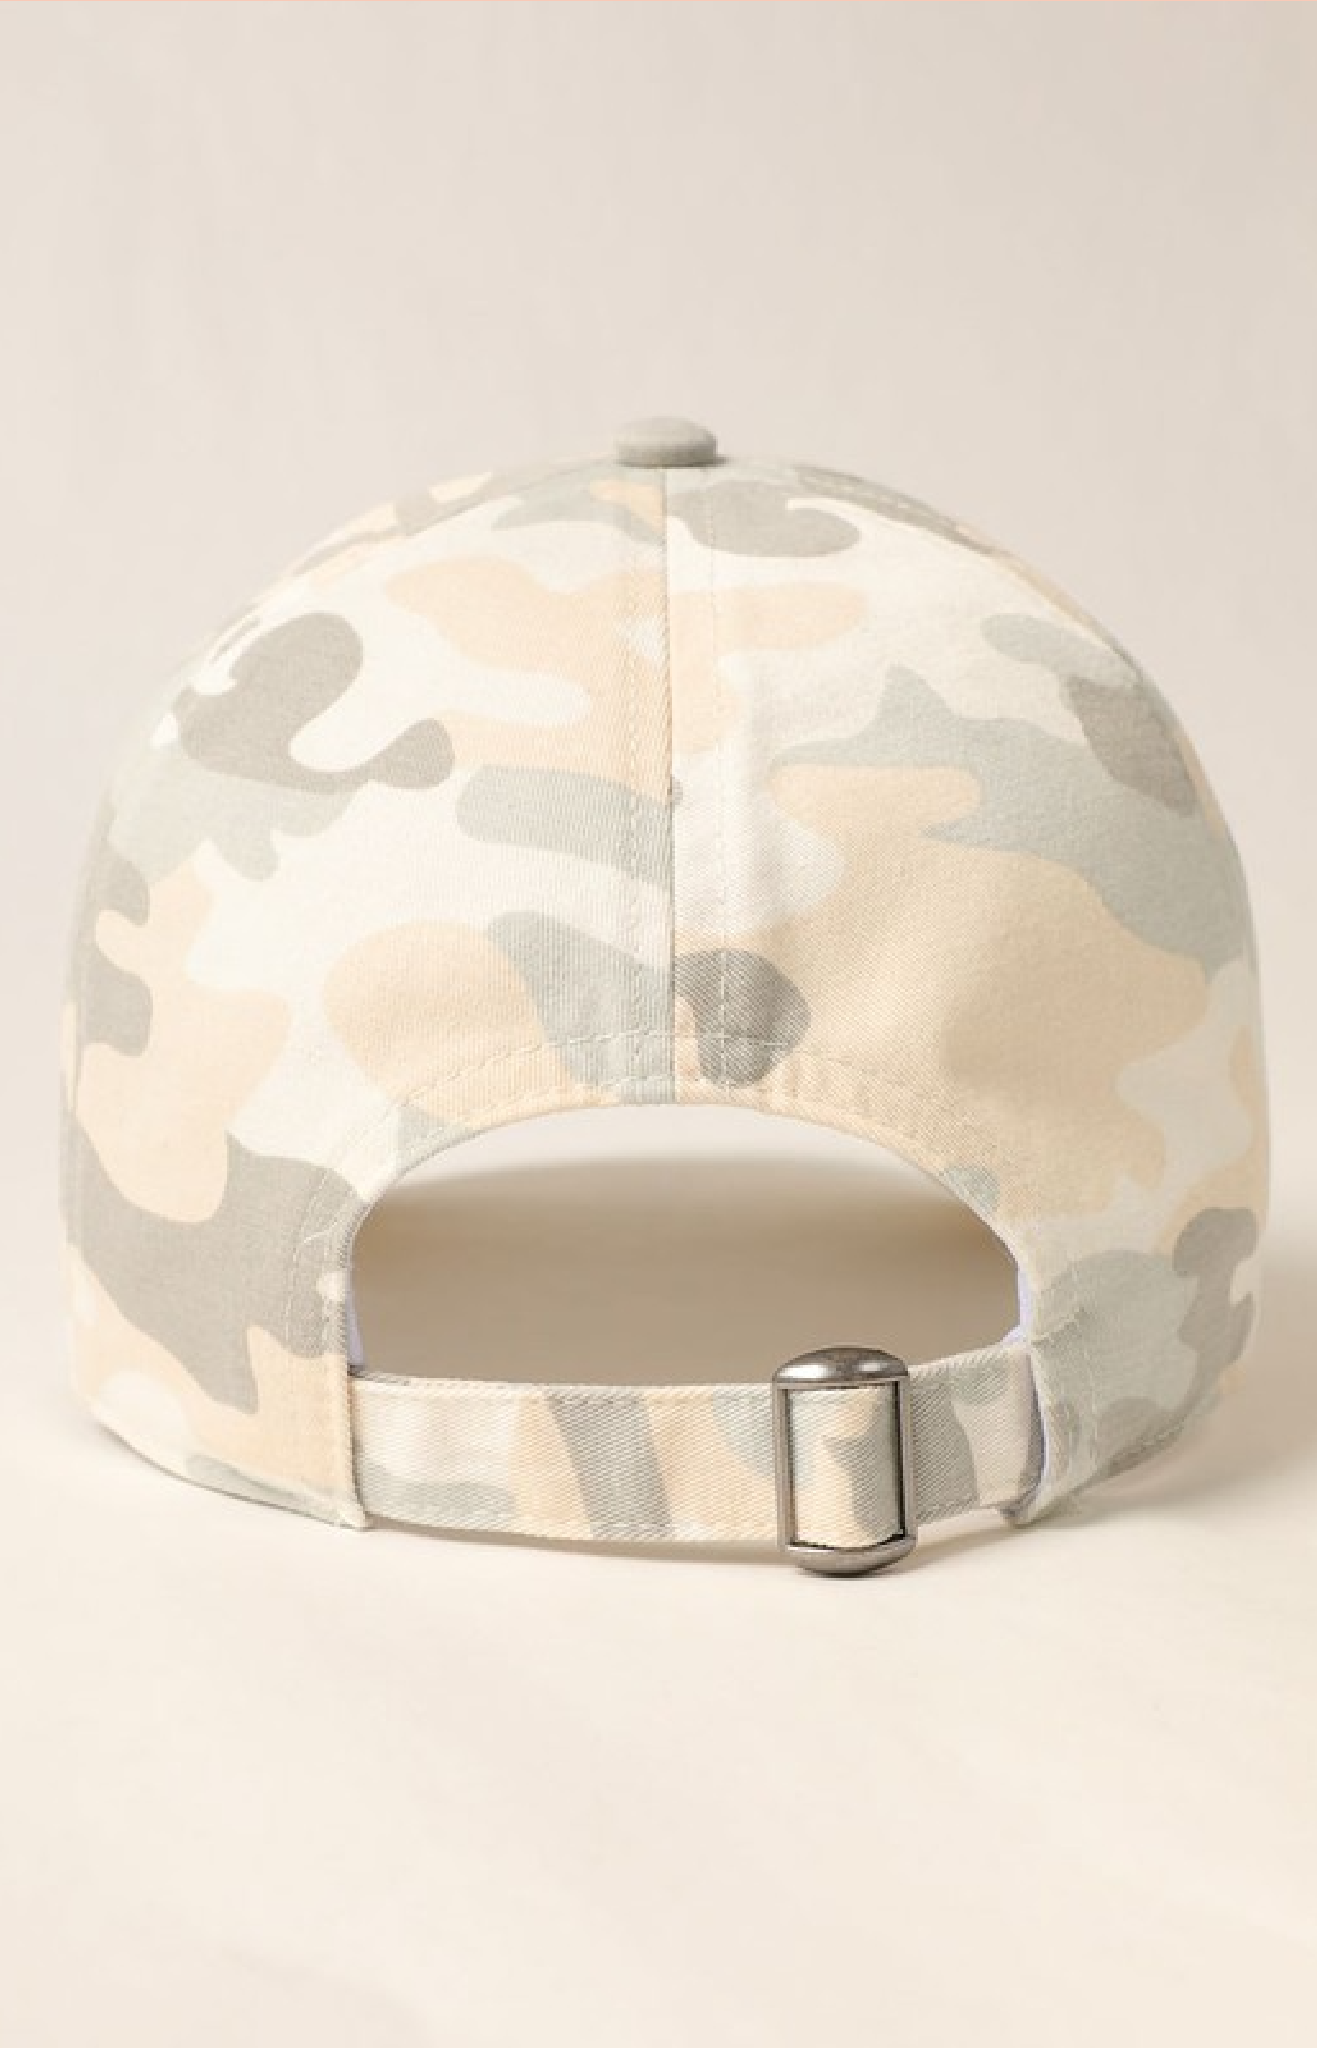 Light Camo - Hat - Piper and Hollow Boutique